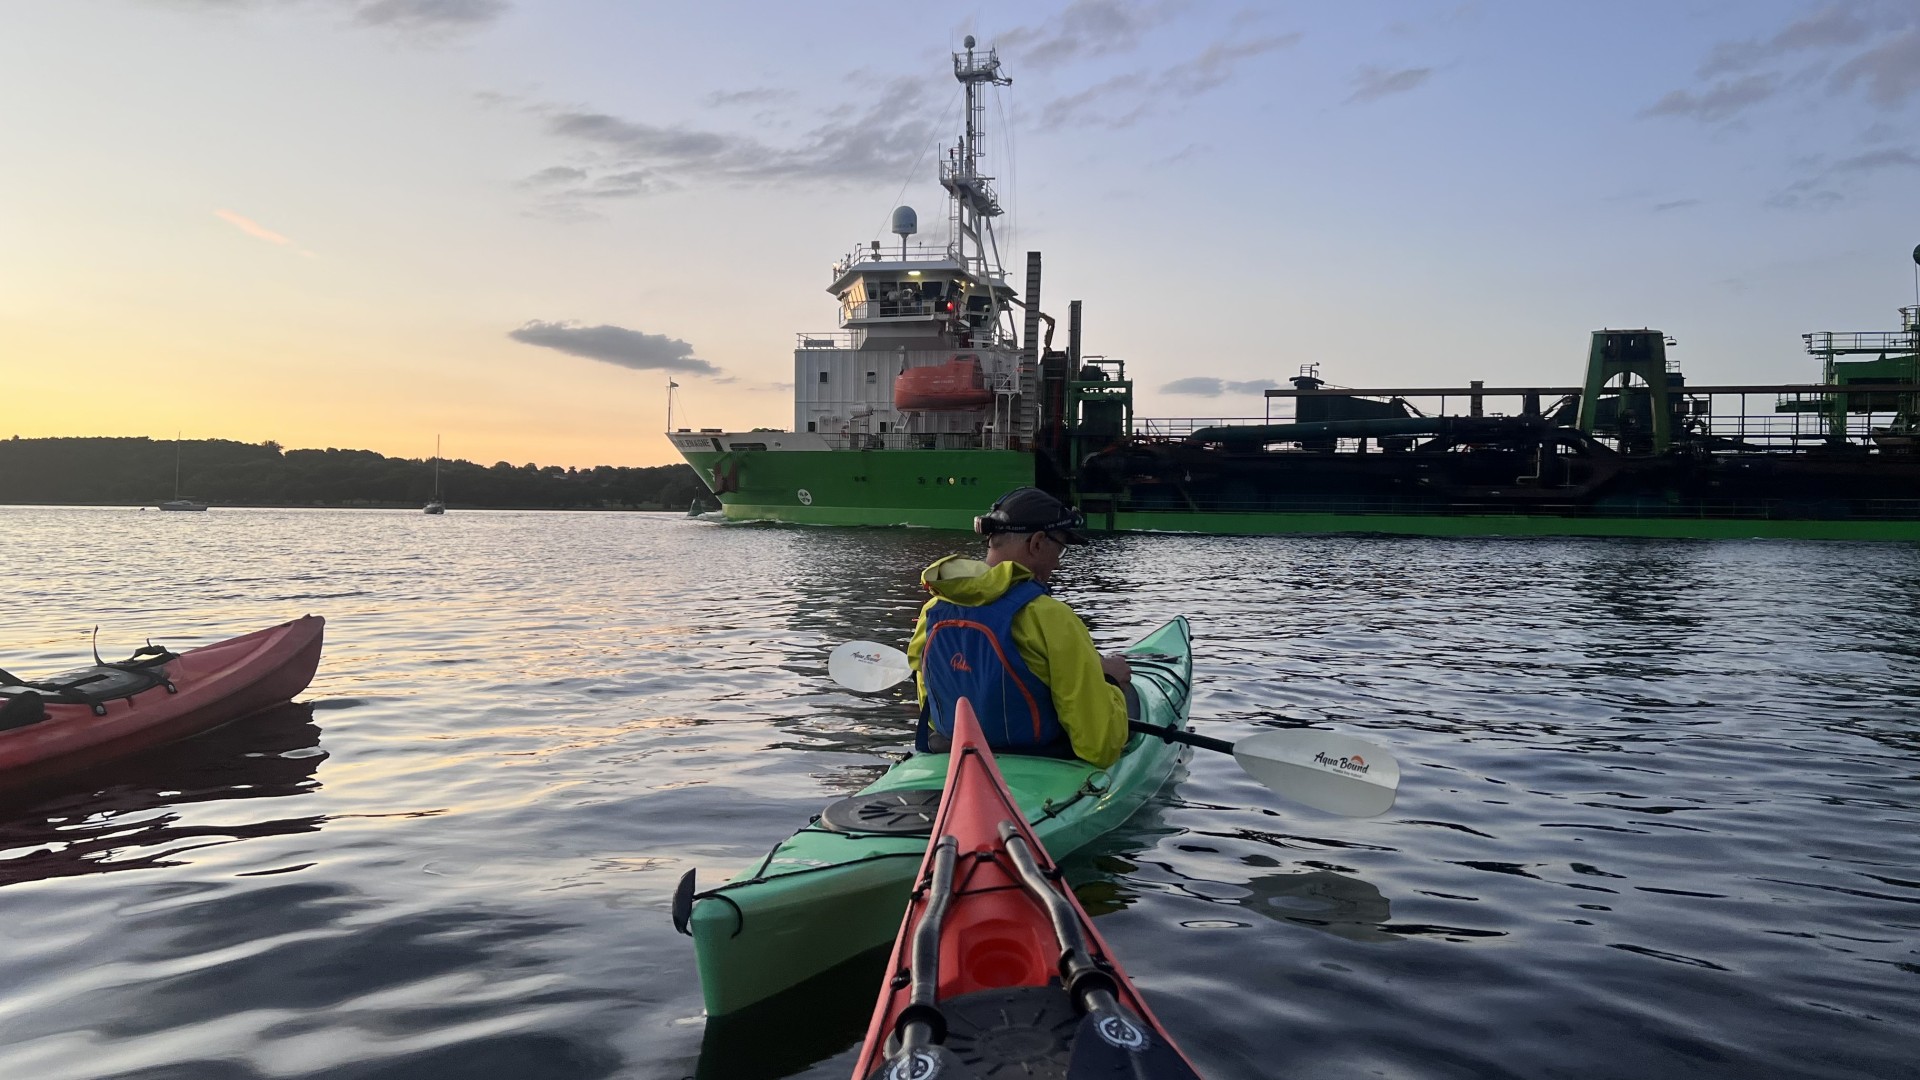 A dredger passing sea kayakers with NOMAD Sea Kayaking.